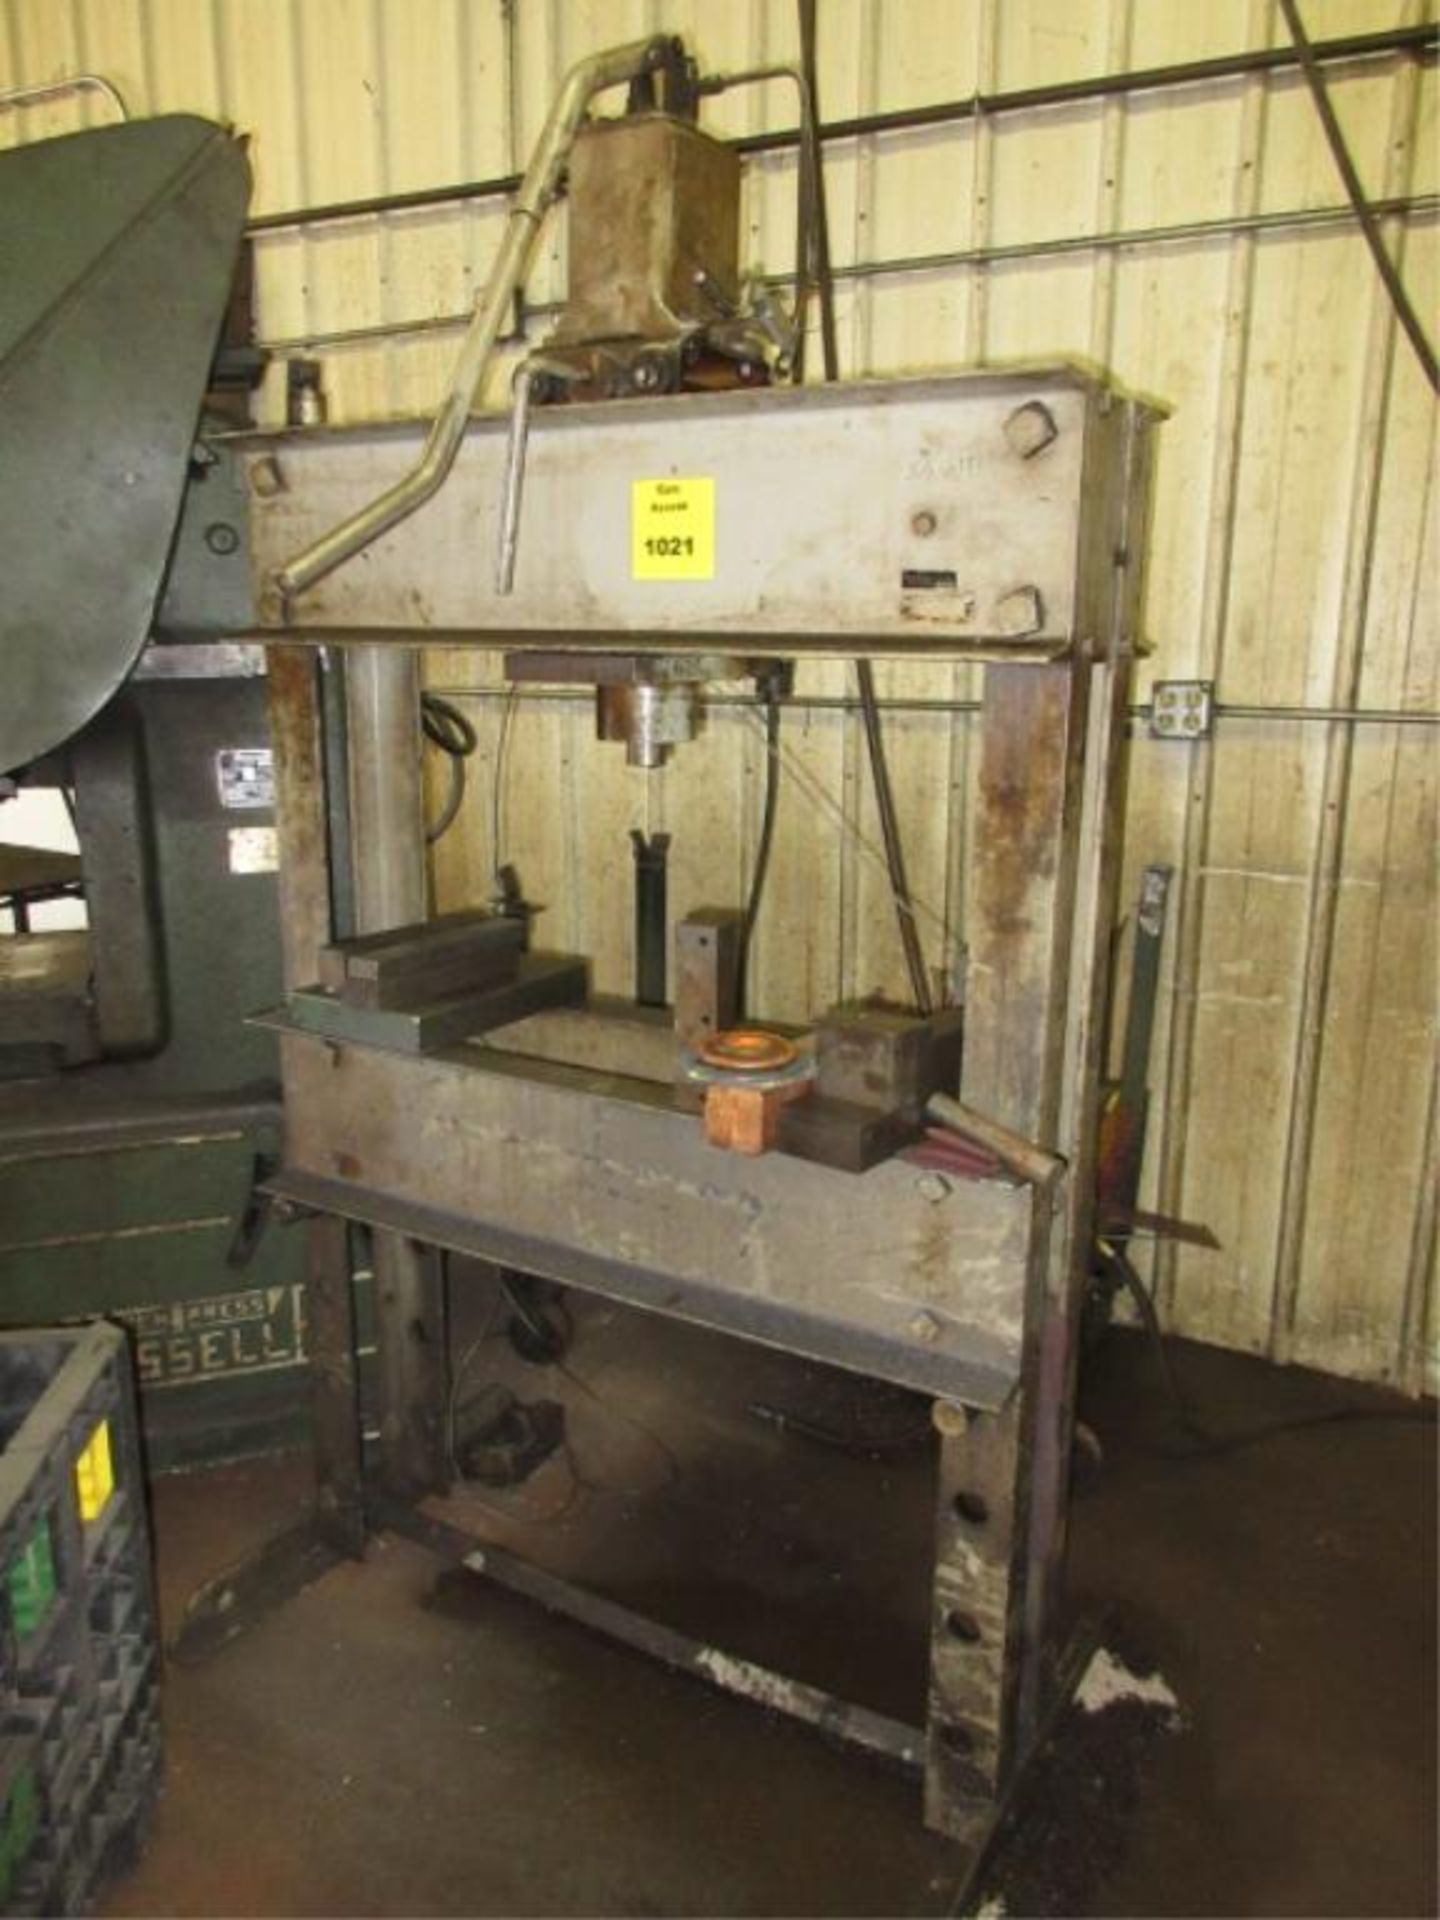 Rodgers H-Frame Shop Press. Rodgers KDS-50 H-Frame Shop Press, approx. 50-Ton capacity. SN# 1060-